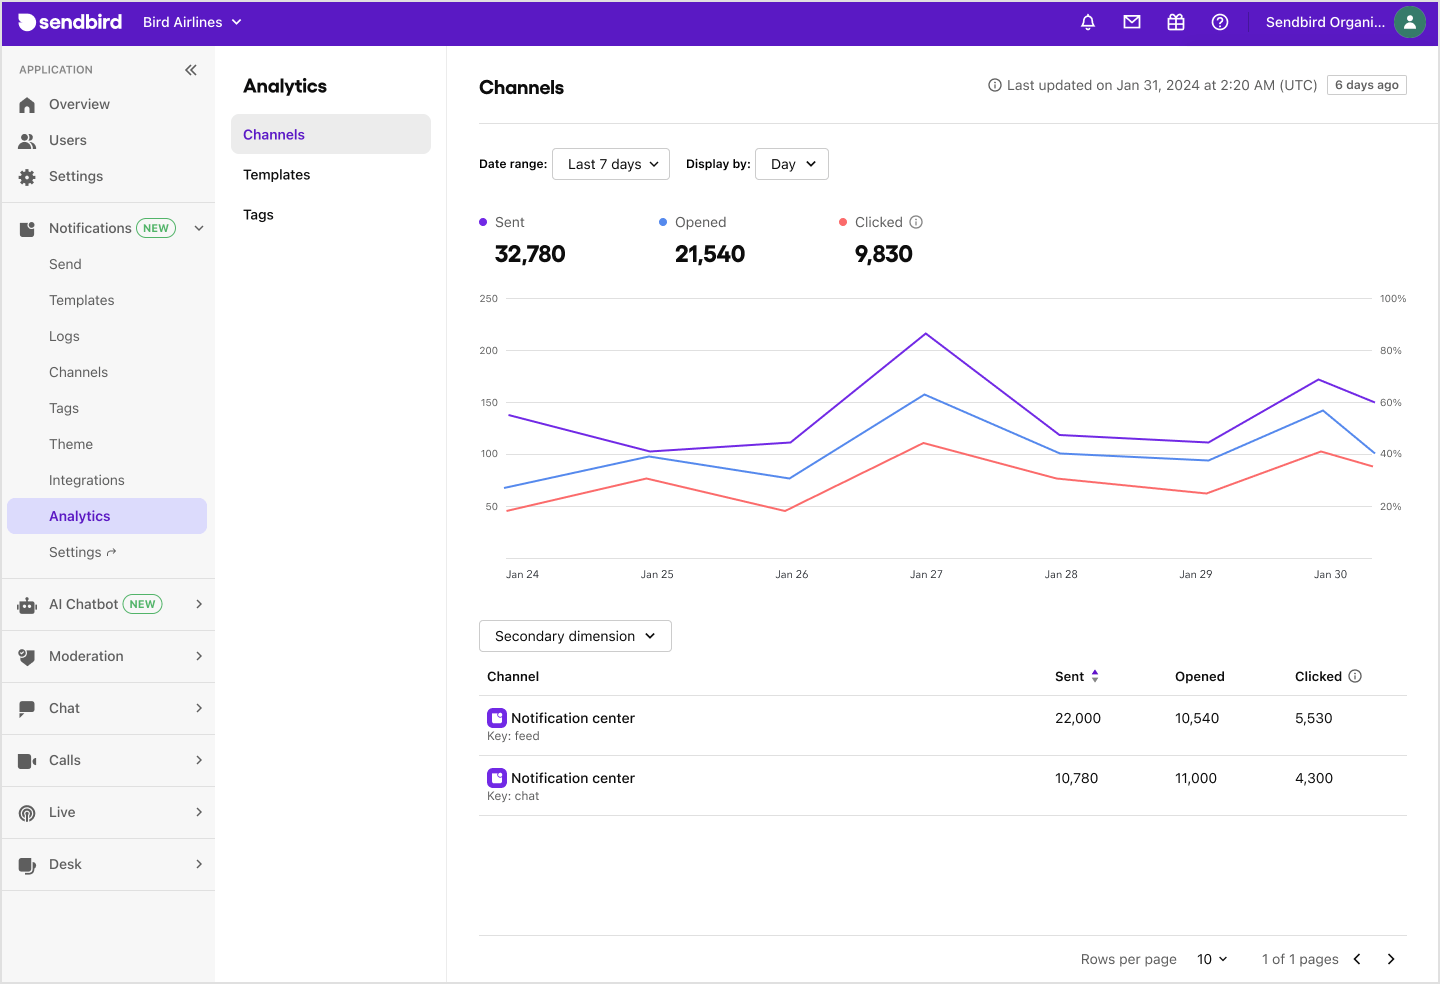 image|The Channels tab for the Analytics page on Sendbird Dashboard